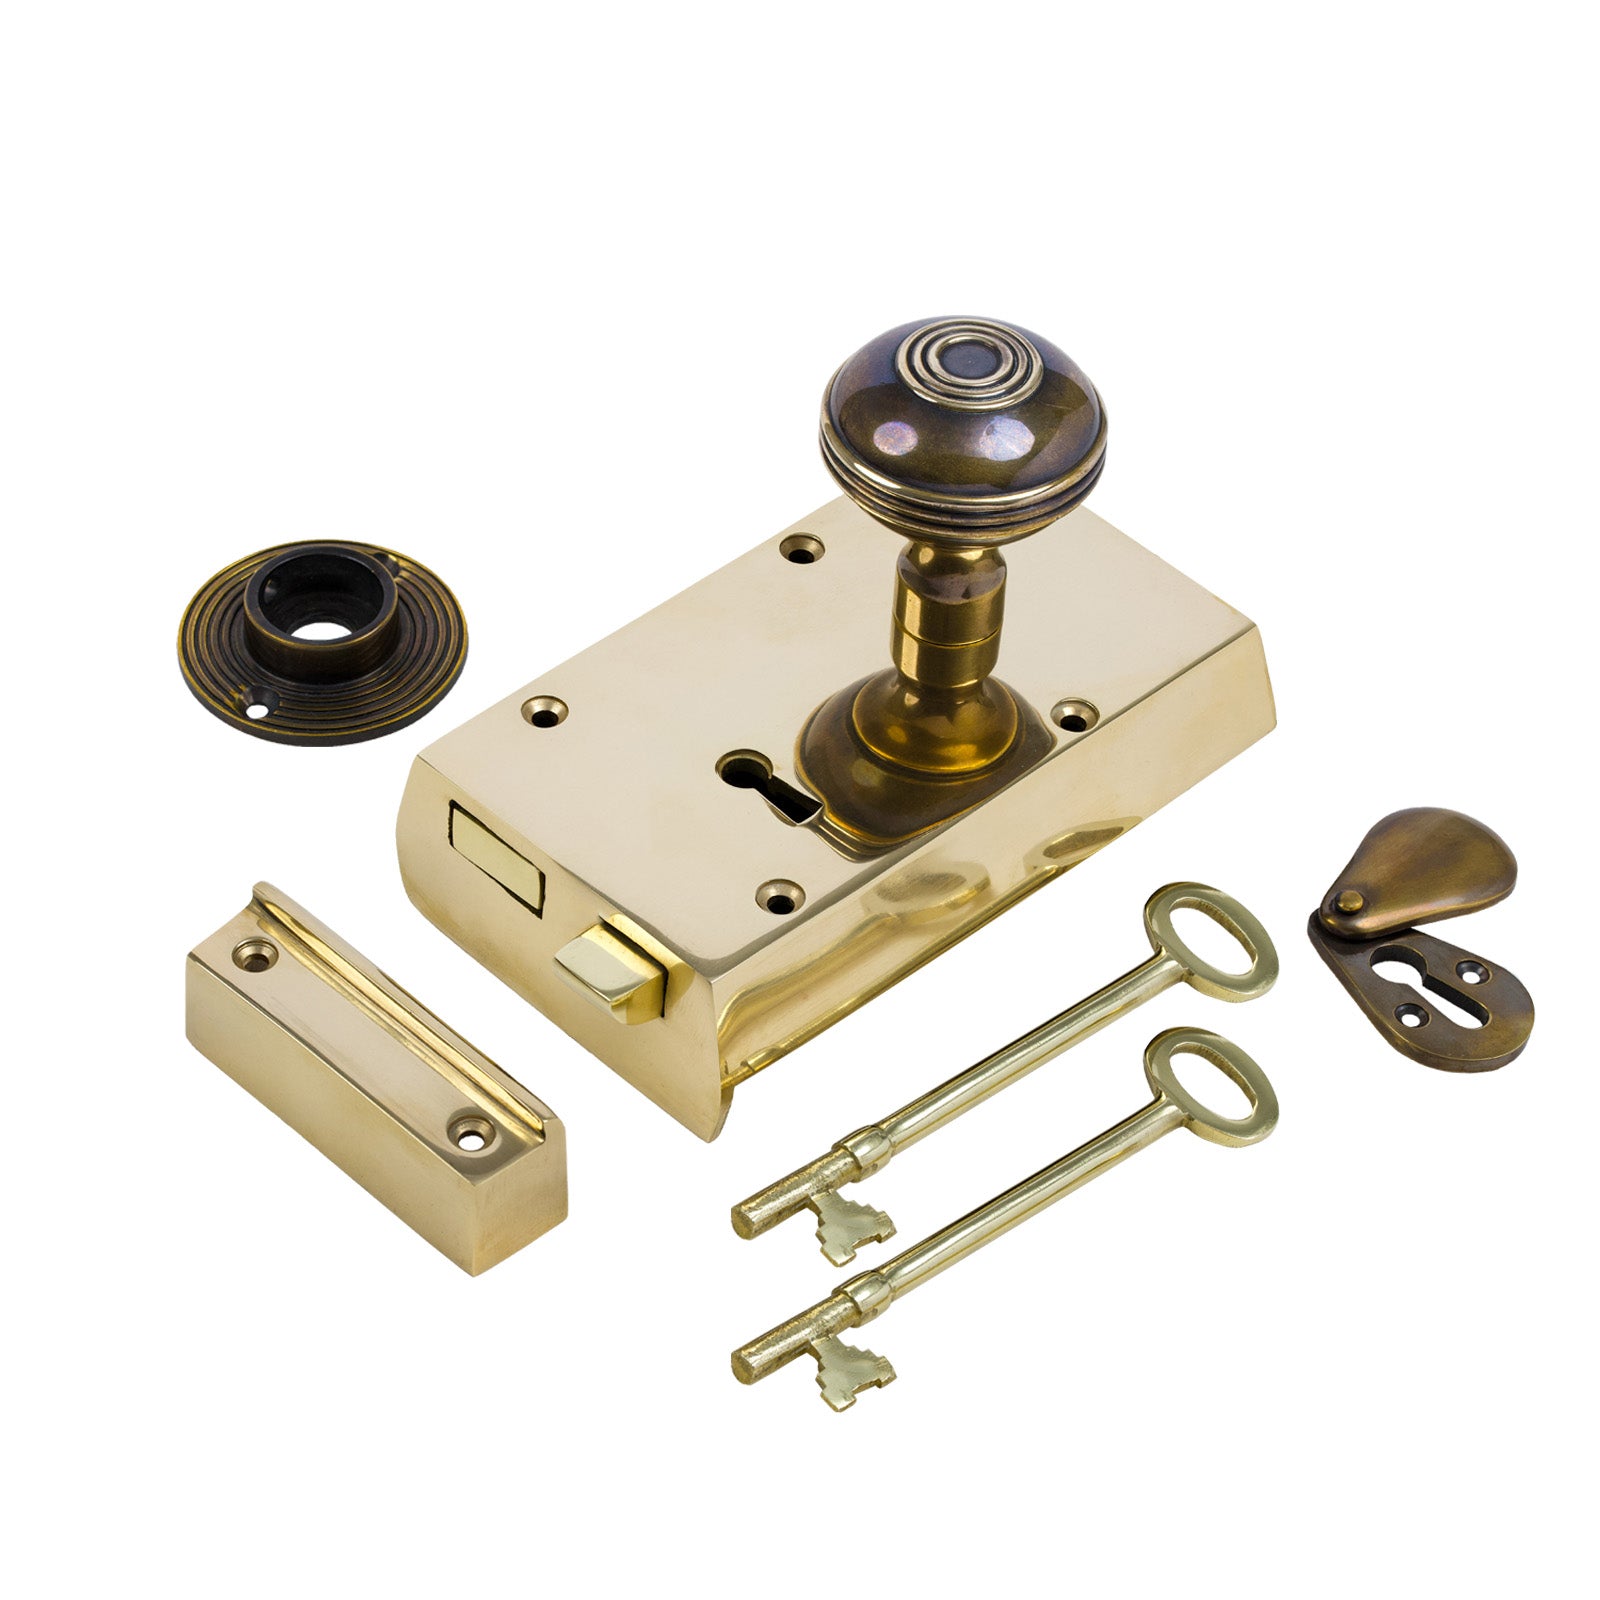 SHOW Right Handed Small Brass Rim Lock with Brass Ringed Door Knob Set - Antique Brass